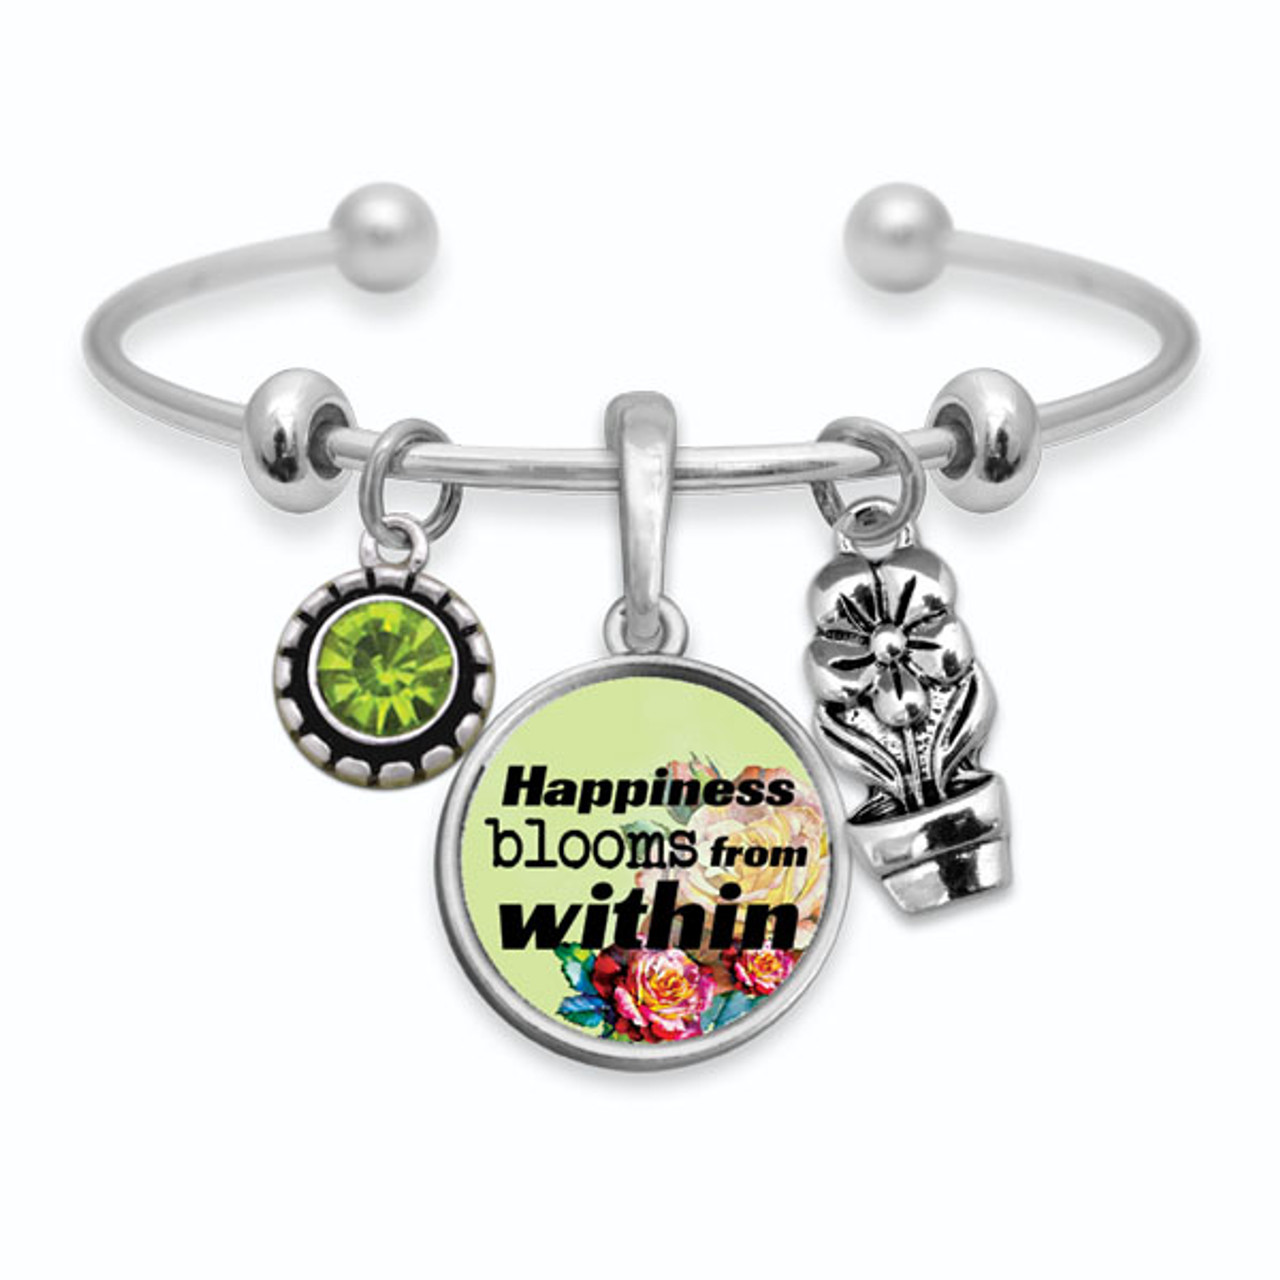 Happiness Blooms From Within 3 Charm Cuff Bracelet